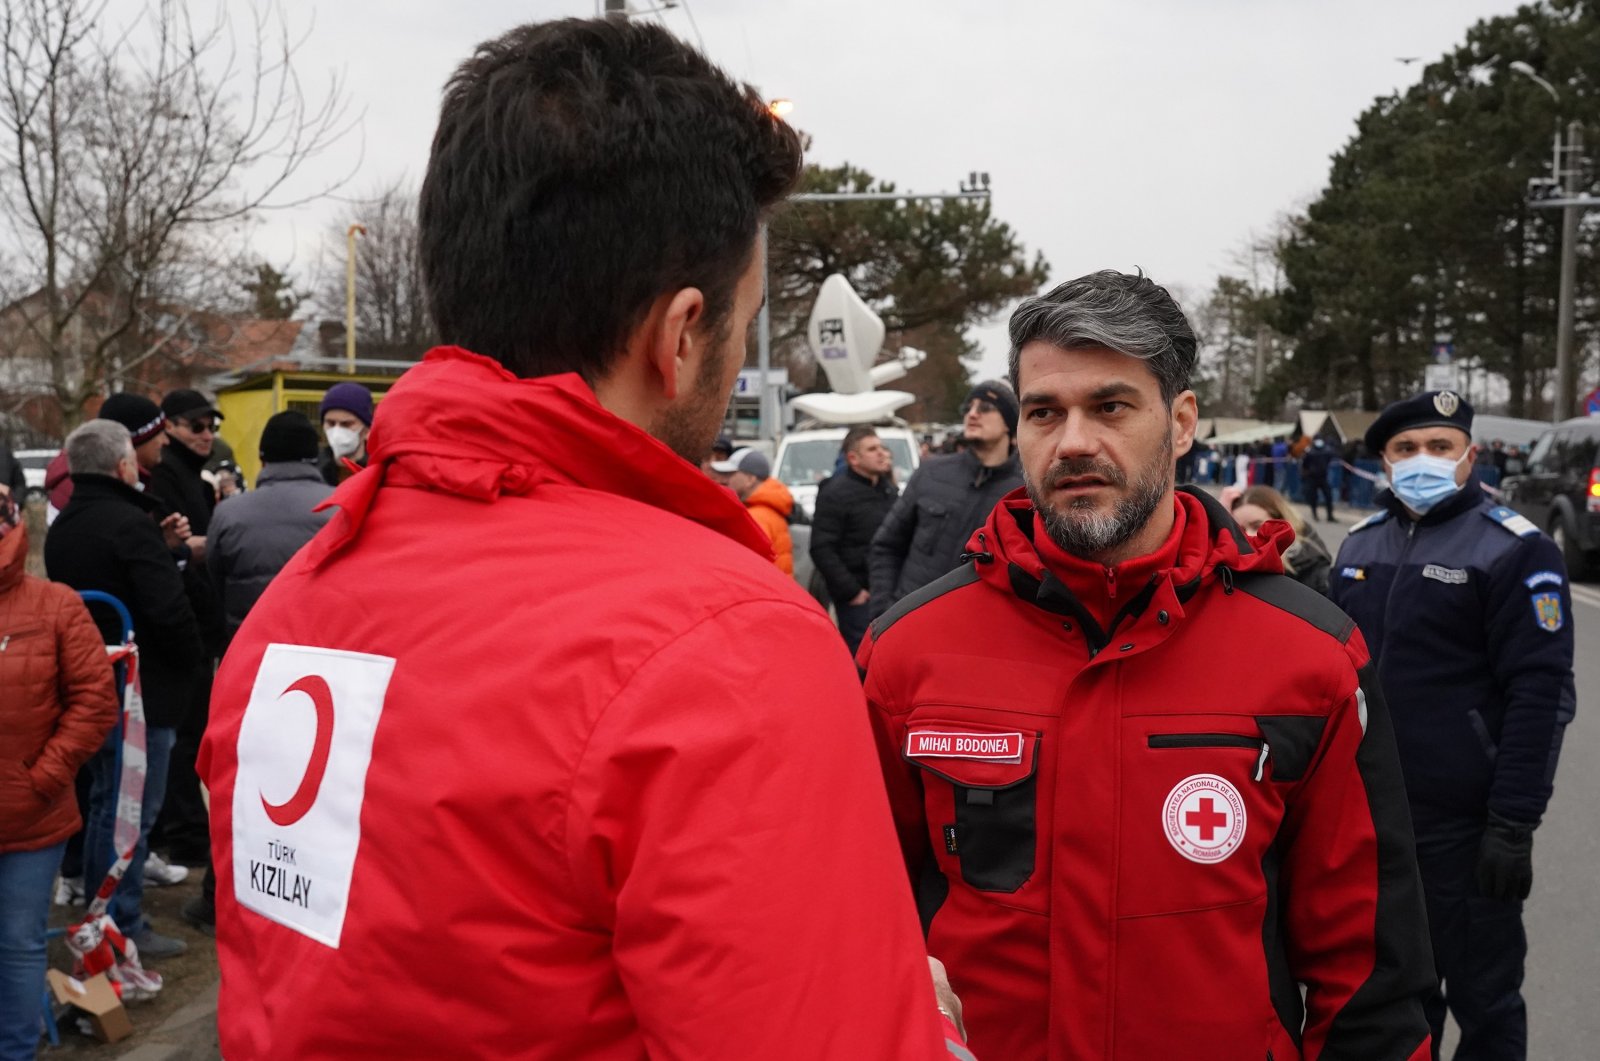 A Turkish Red Crescent (Kızılay) personnel speaks with a foreign colleague near the Siret Border Gate with Ukraine located near the city of Suceava, northern Romania, Feb. 28, 2022. (IHA Photo)